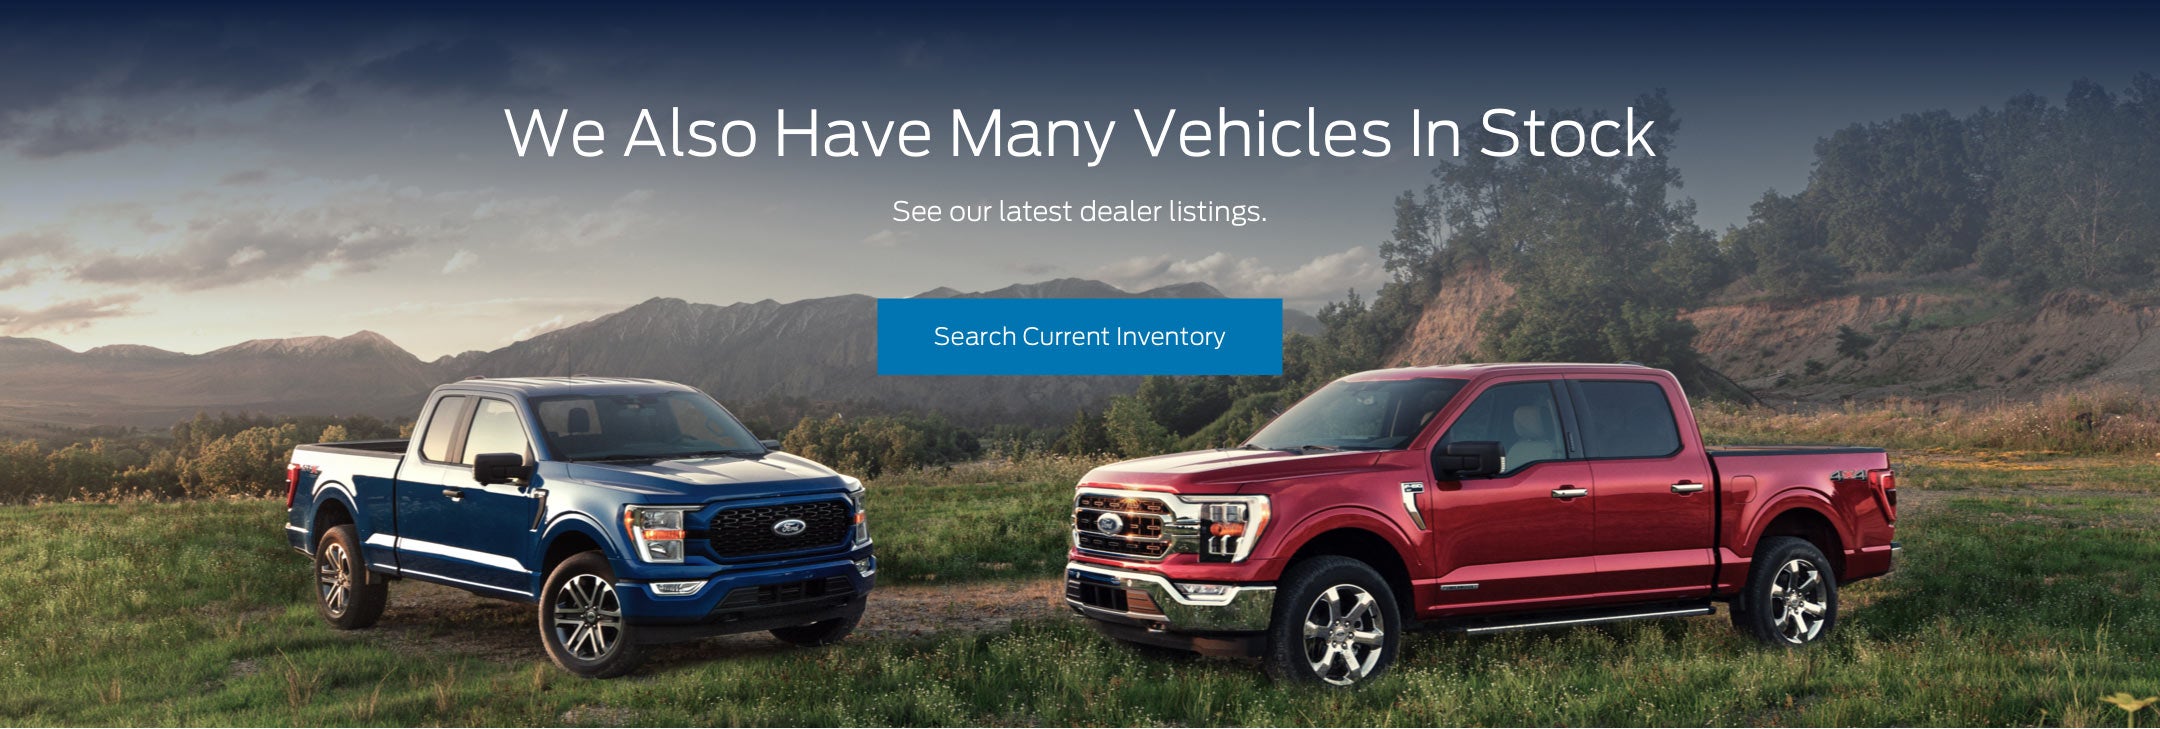 Ford vehicles in stock | Rush Truck Centers - San Diego in San Diego CA